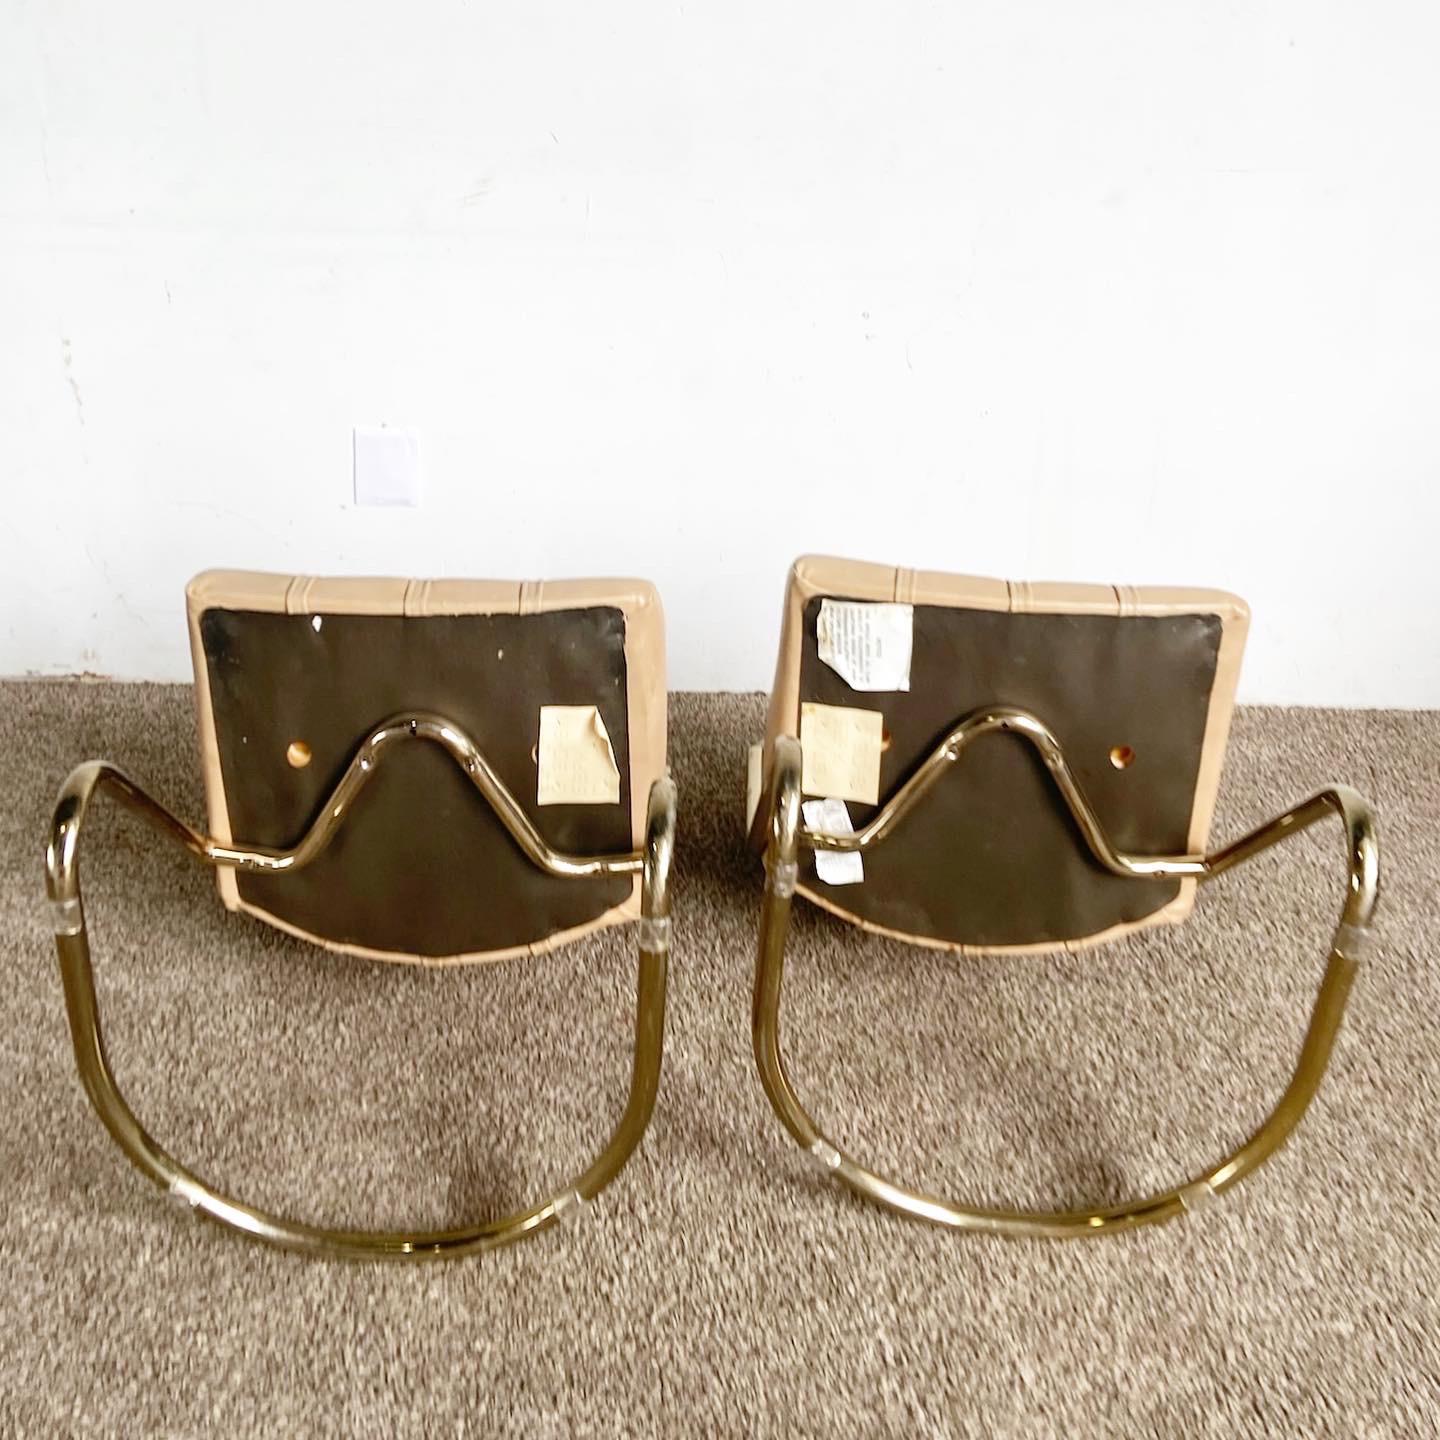 Late 20th Century Mid Century Modern Gold and Tan Tufted Cantilever Chairs by Chromcraft - a Pair